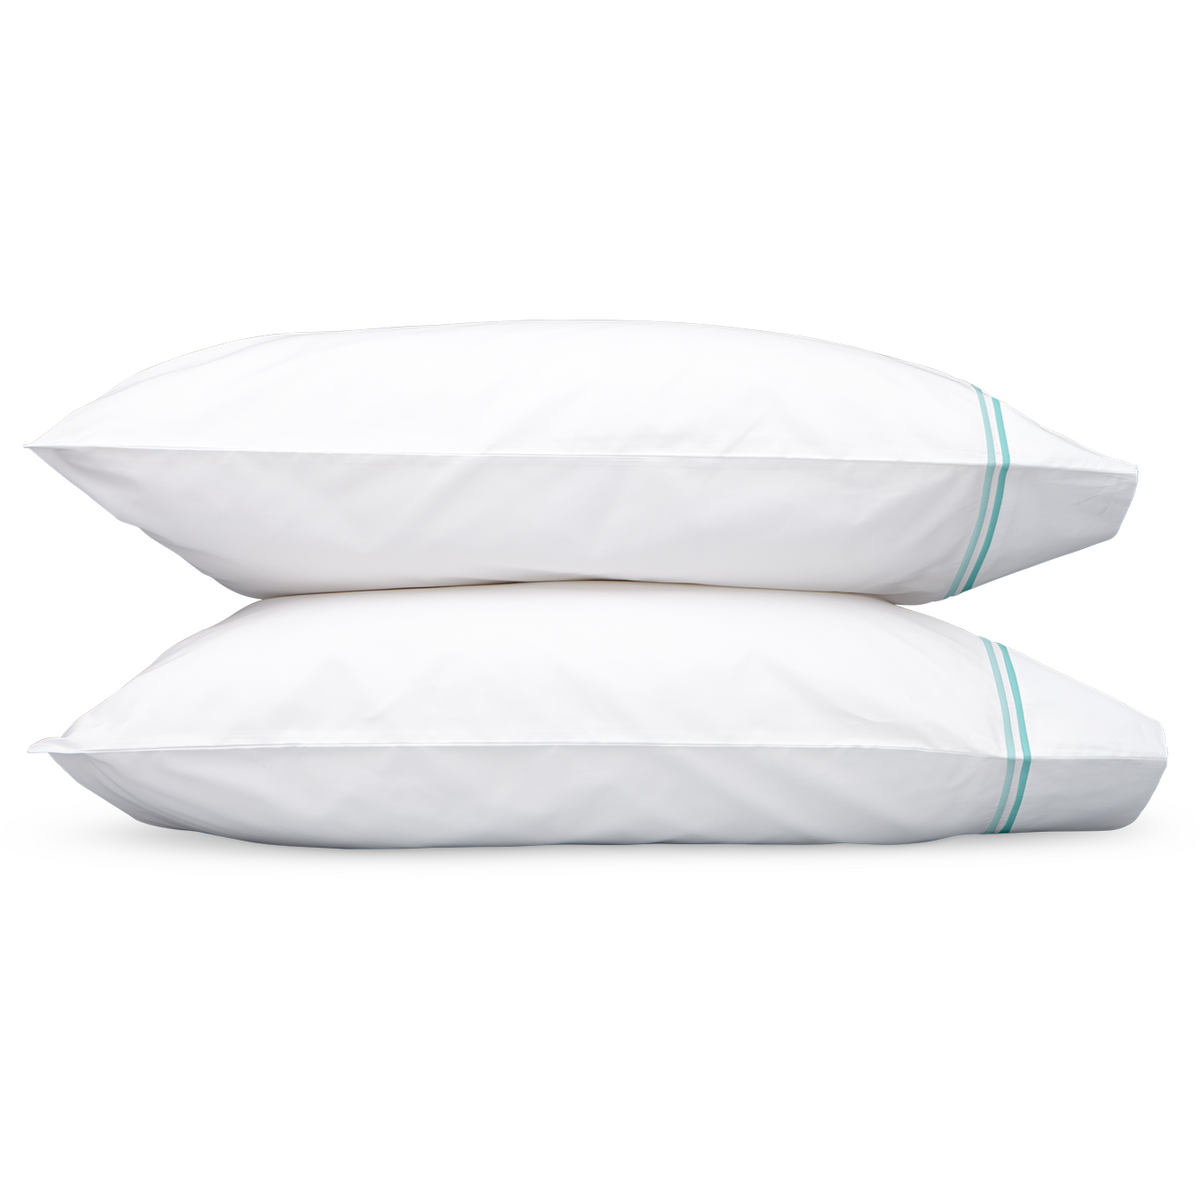 Matouk Essex High End Bed Pair of Two Pillowcases - Lagoon